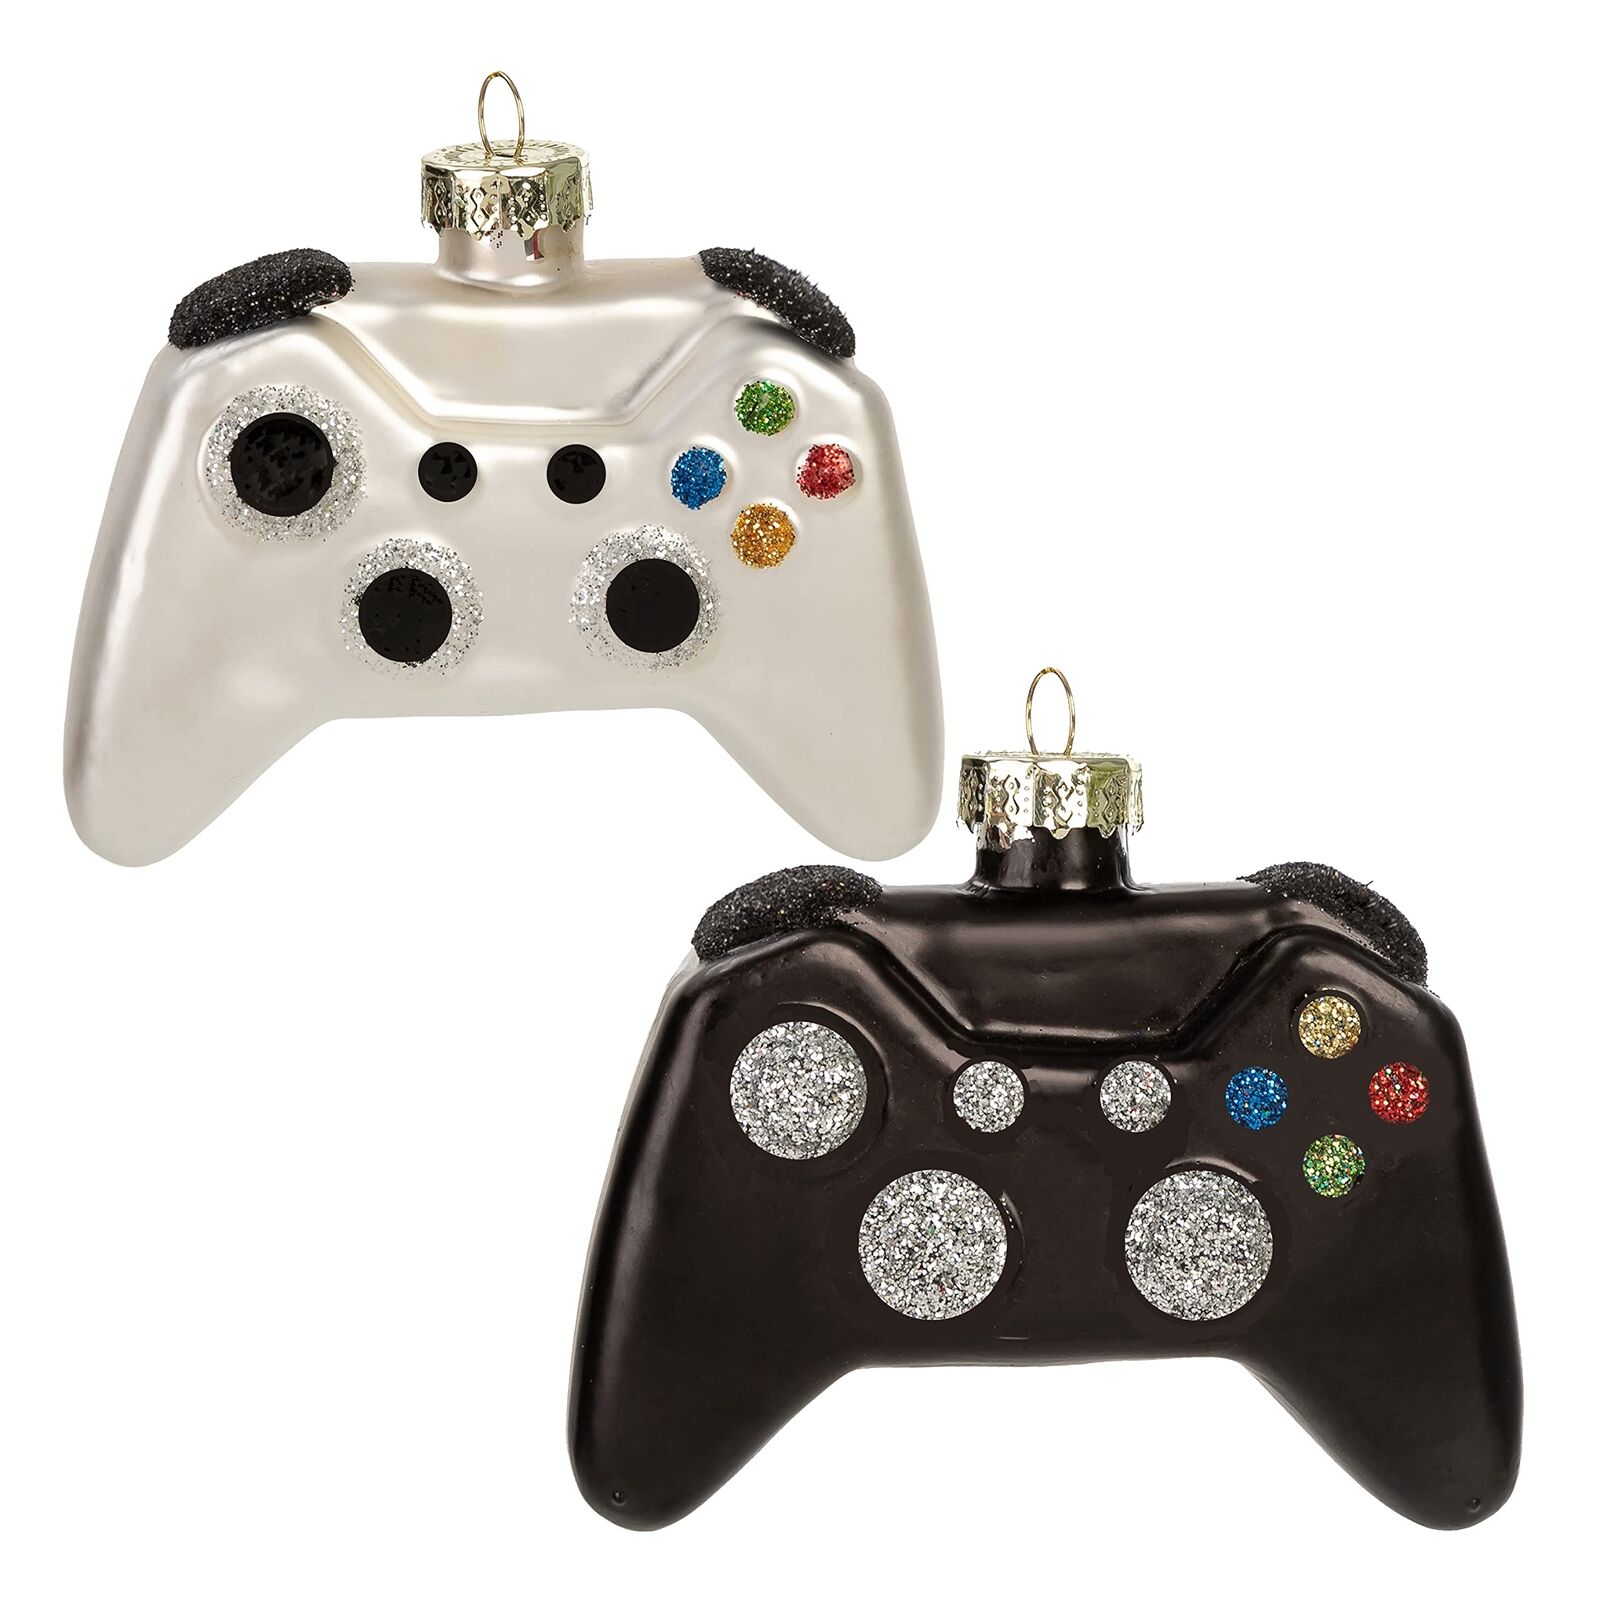 Syncfun Christmas Glass Video Game Controller Ornament Christmas Tree Decoration